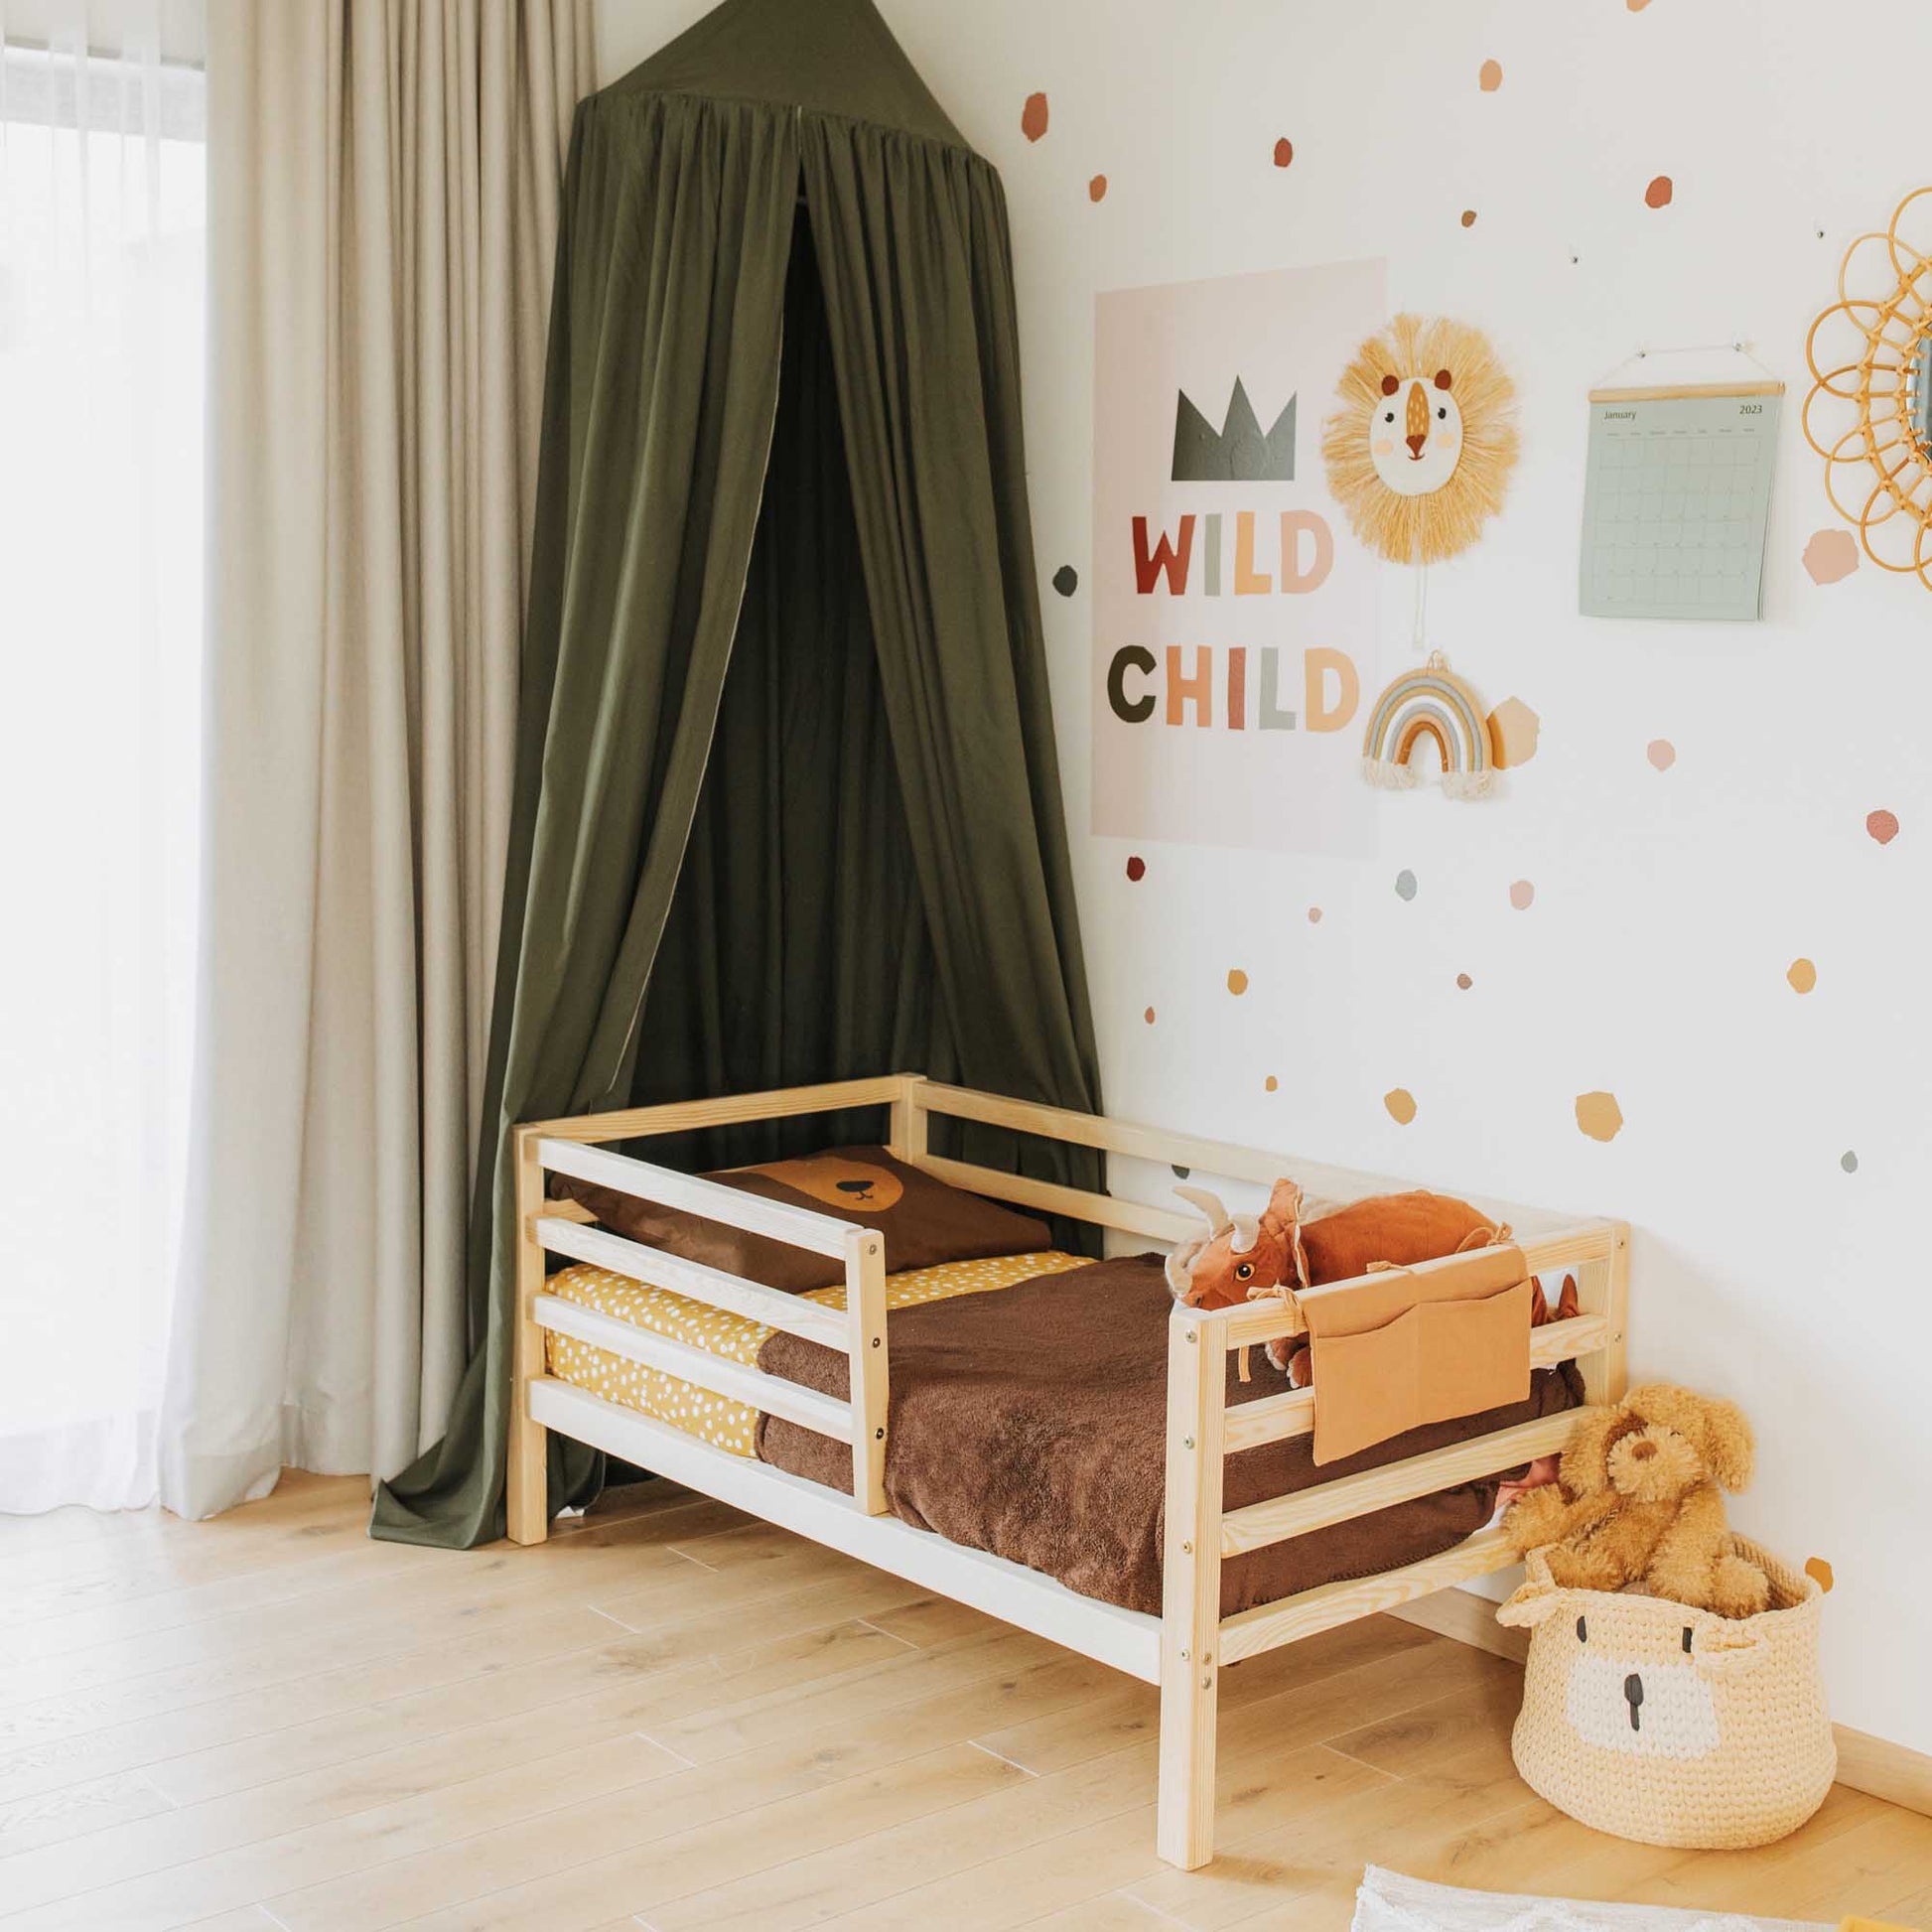 A child's room with a canopy and teddy bears, featuring the Sweet Home From Wood Kids' bed on legs with a horizontal rail fence.